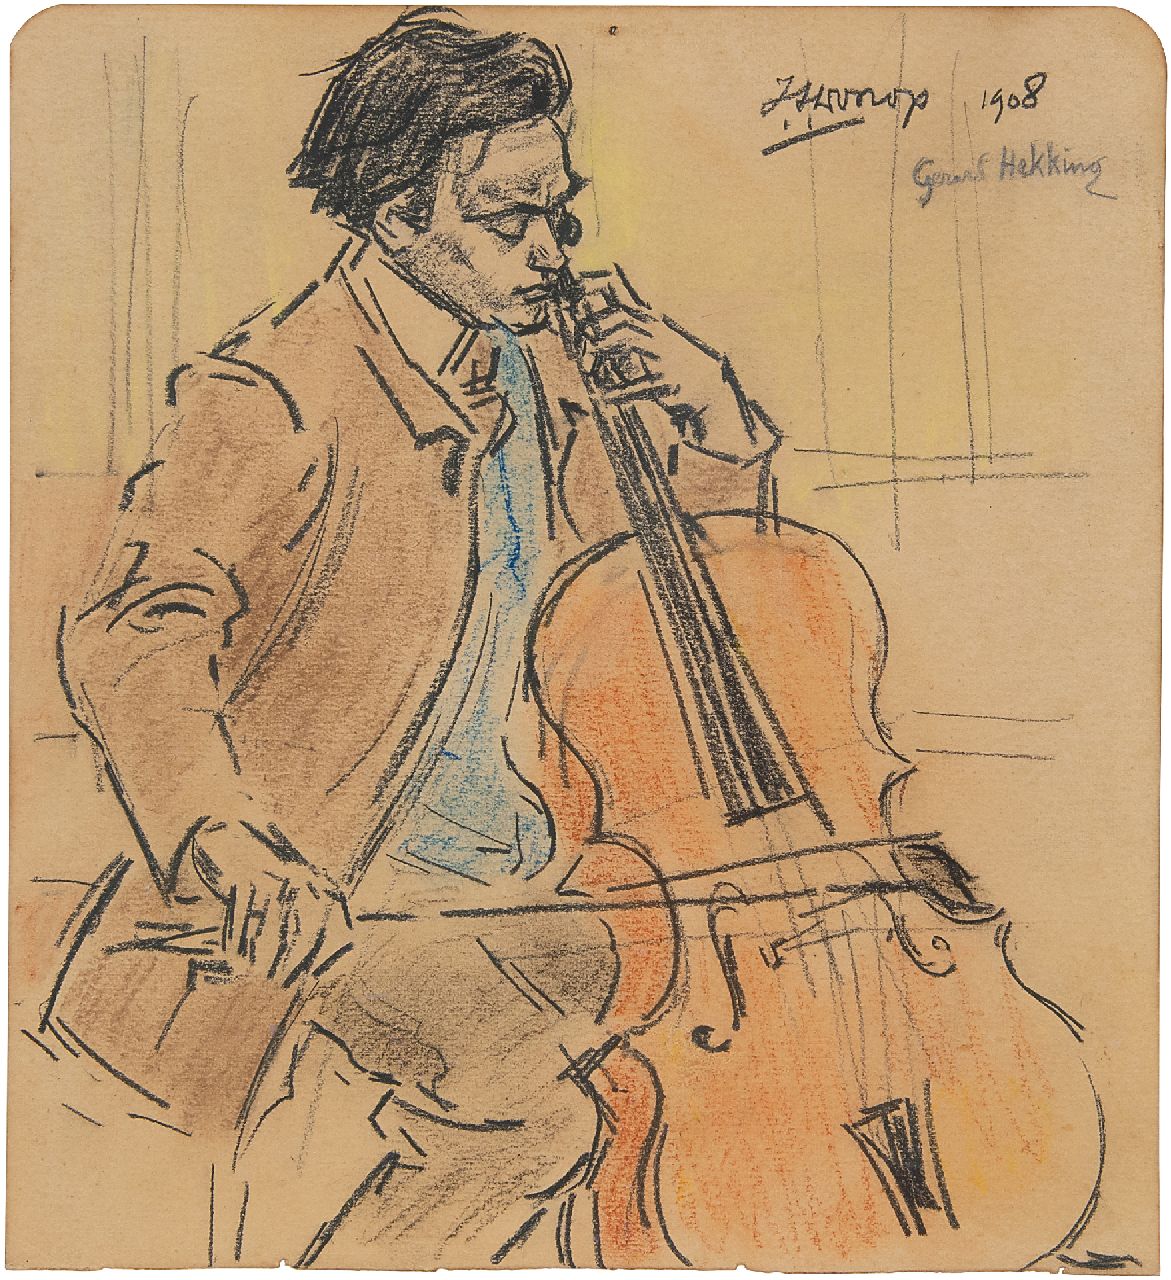 Toorop J.Th.  | Johannes Theodorus 'Jan' Toorop | Watercolours and drawings offered for sale | Gerard Hekking, playing cello, black and coloured chalk on paper 21.6 x 19.7 cm, signed u.r. and dated 1908